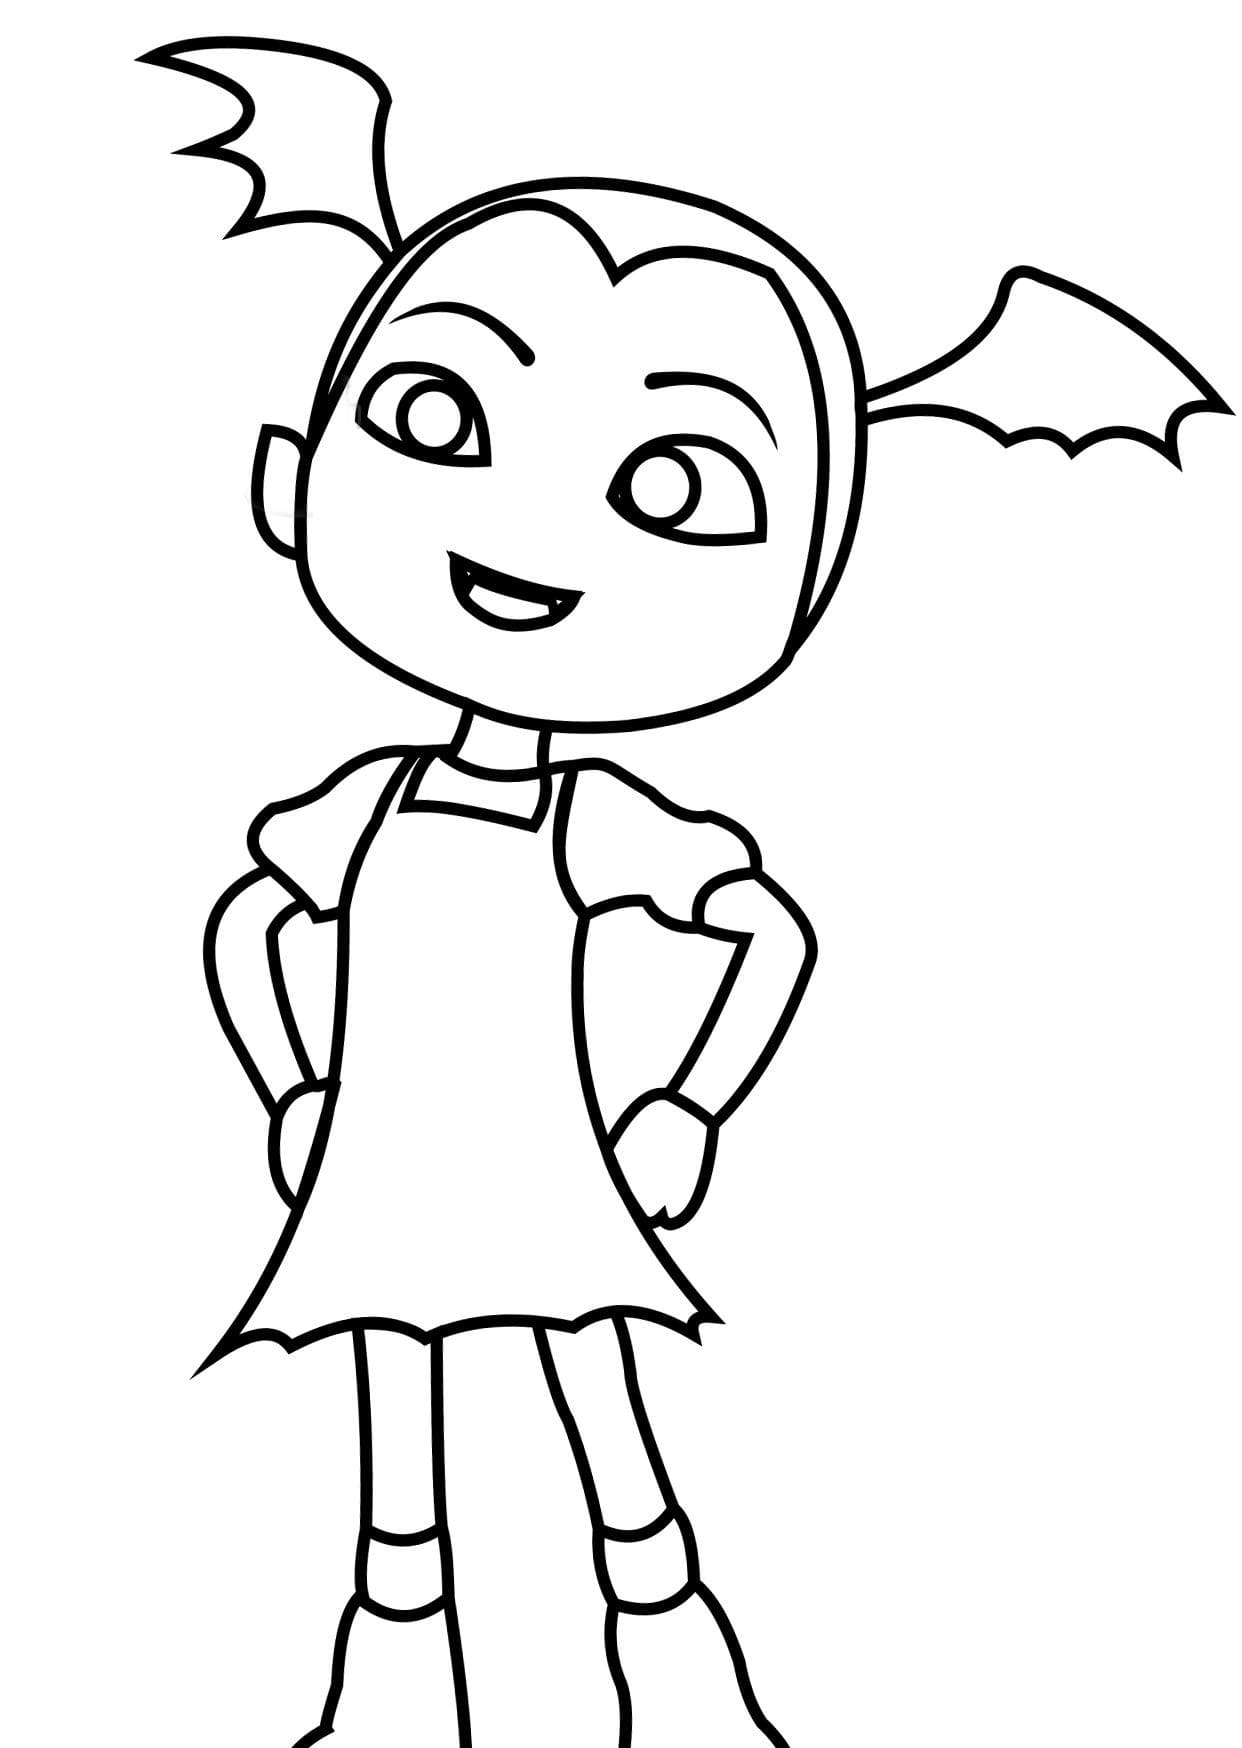 A Nice Vampire Coloring Page